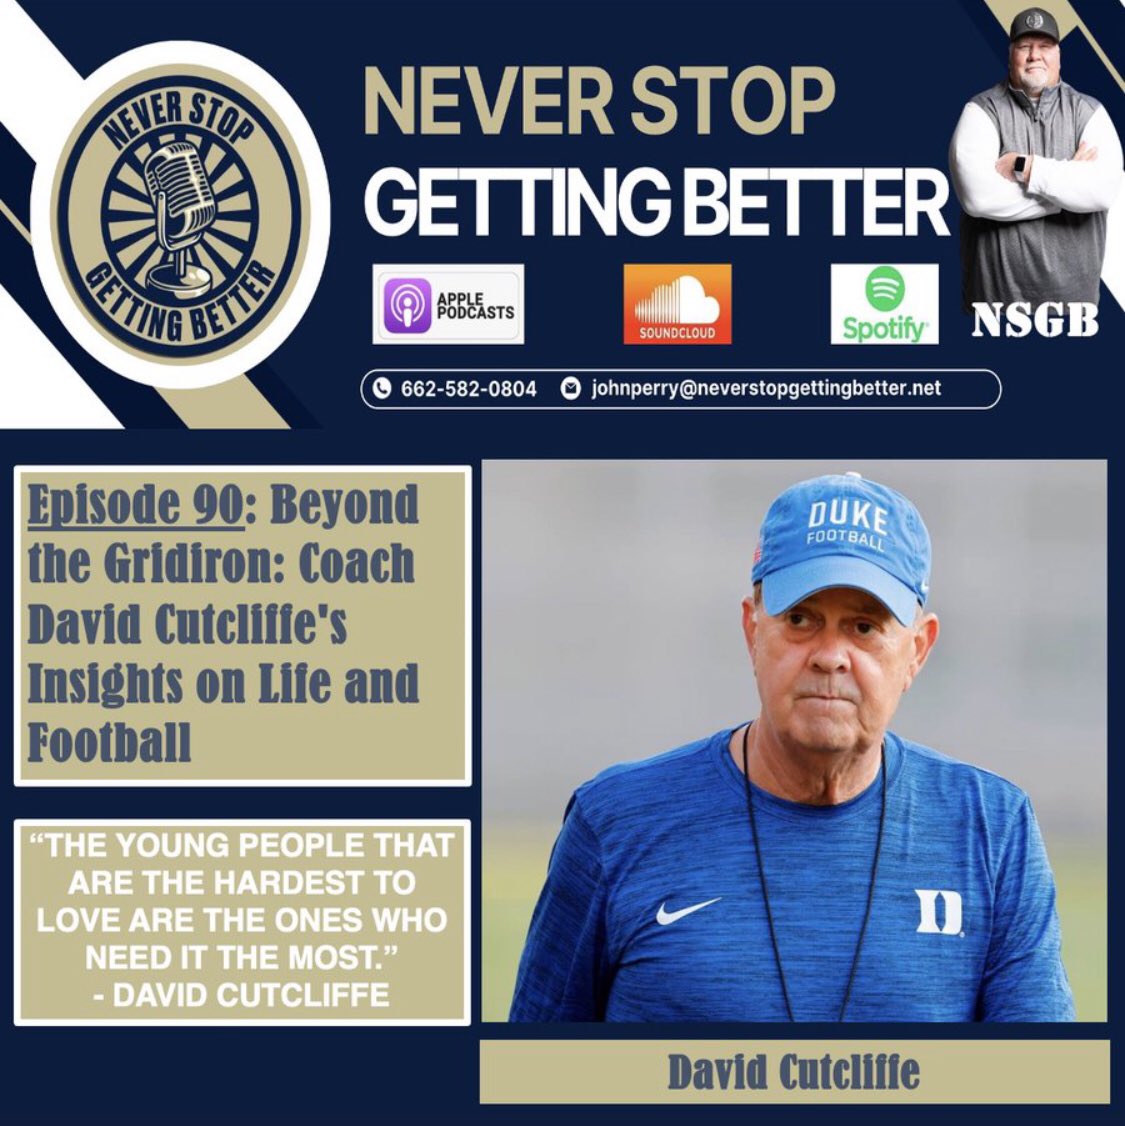 Todays Podcast is good for the Soul! Take a listen! @DavidCutcliffe is one of the good guys in this business! I enjoyed this so much! Thanks coach!